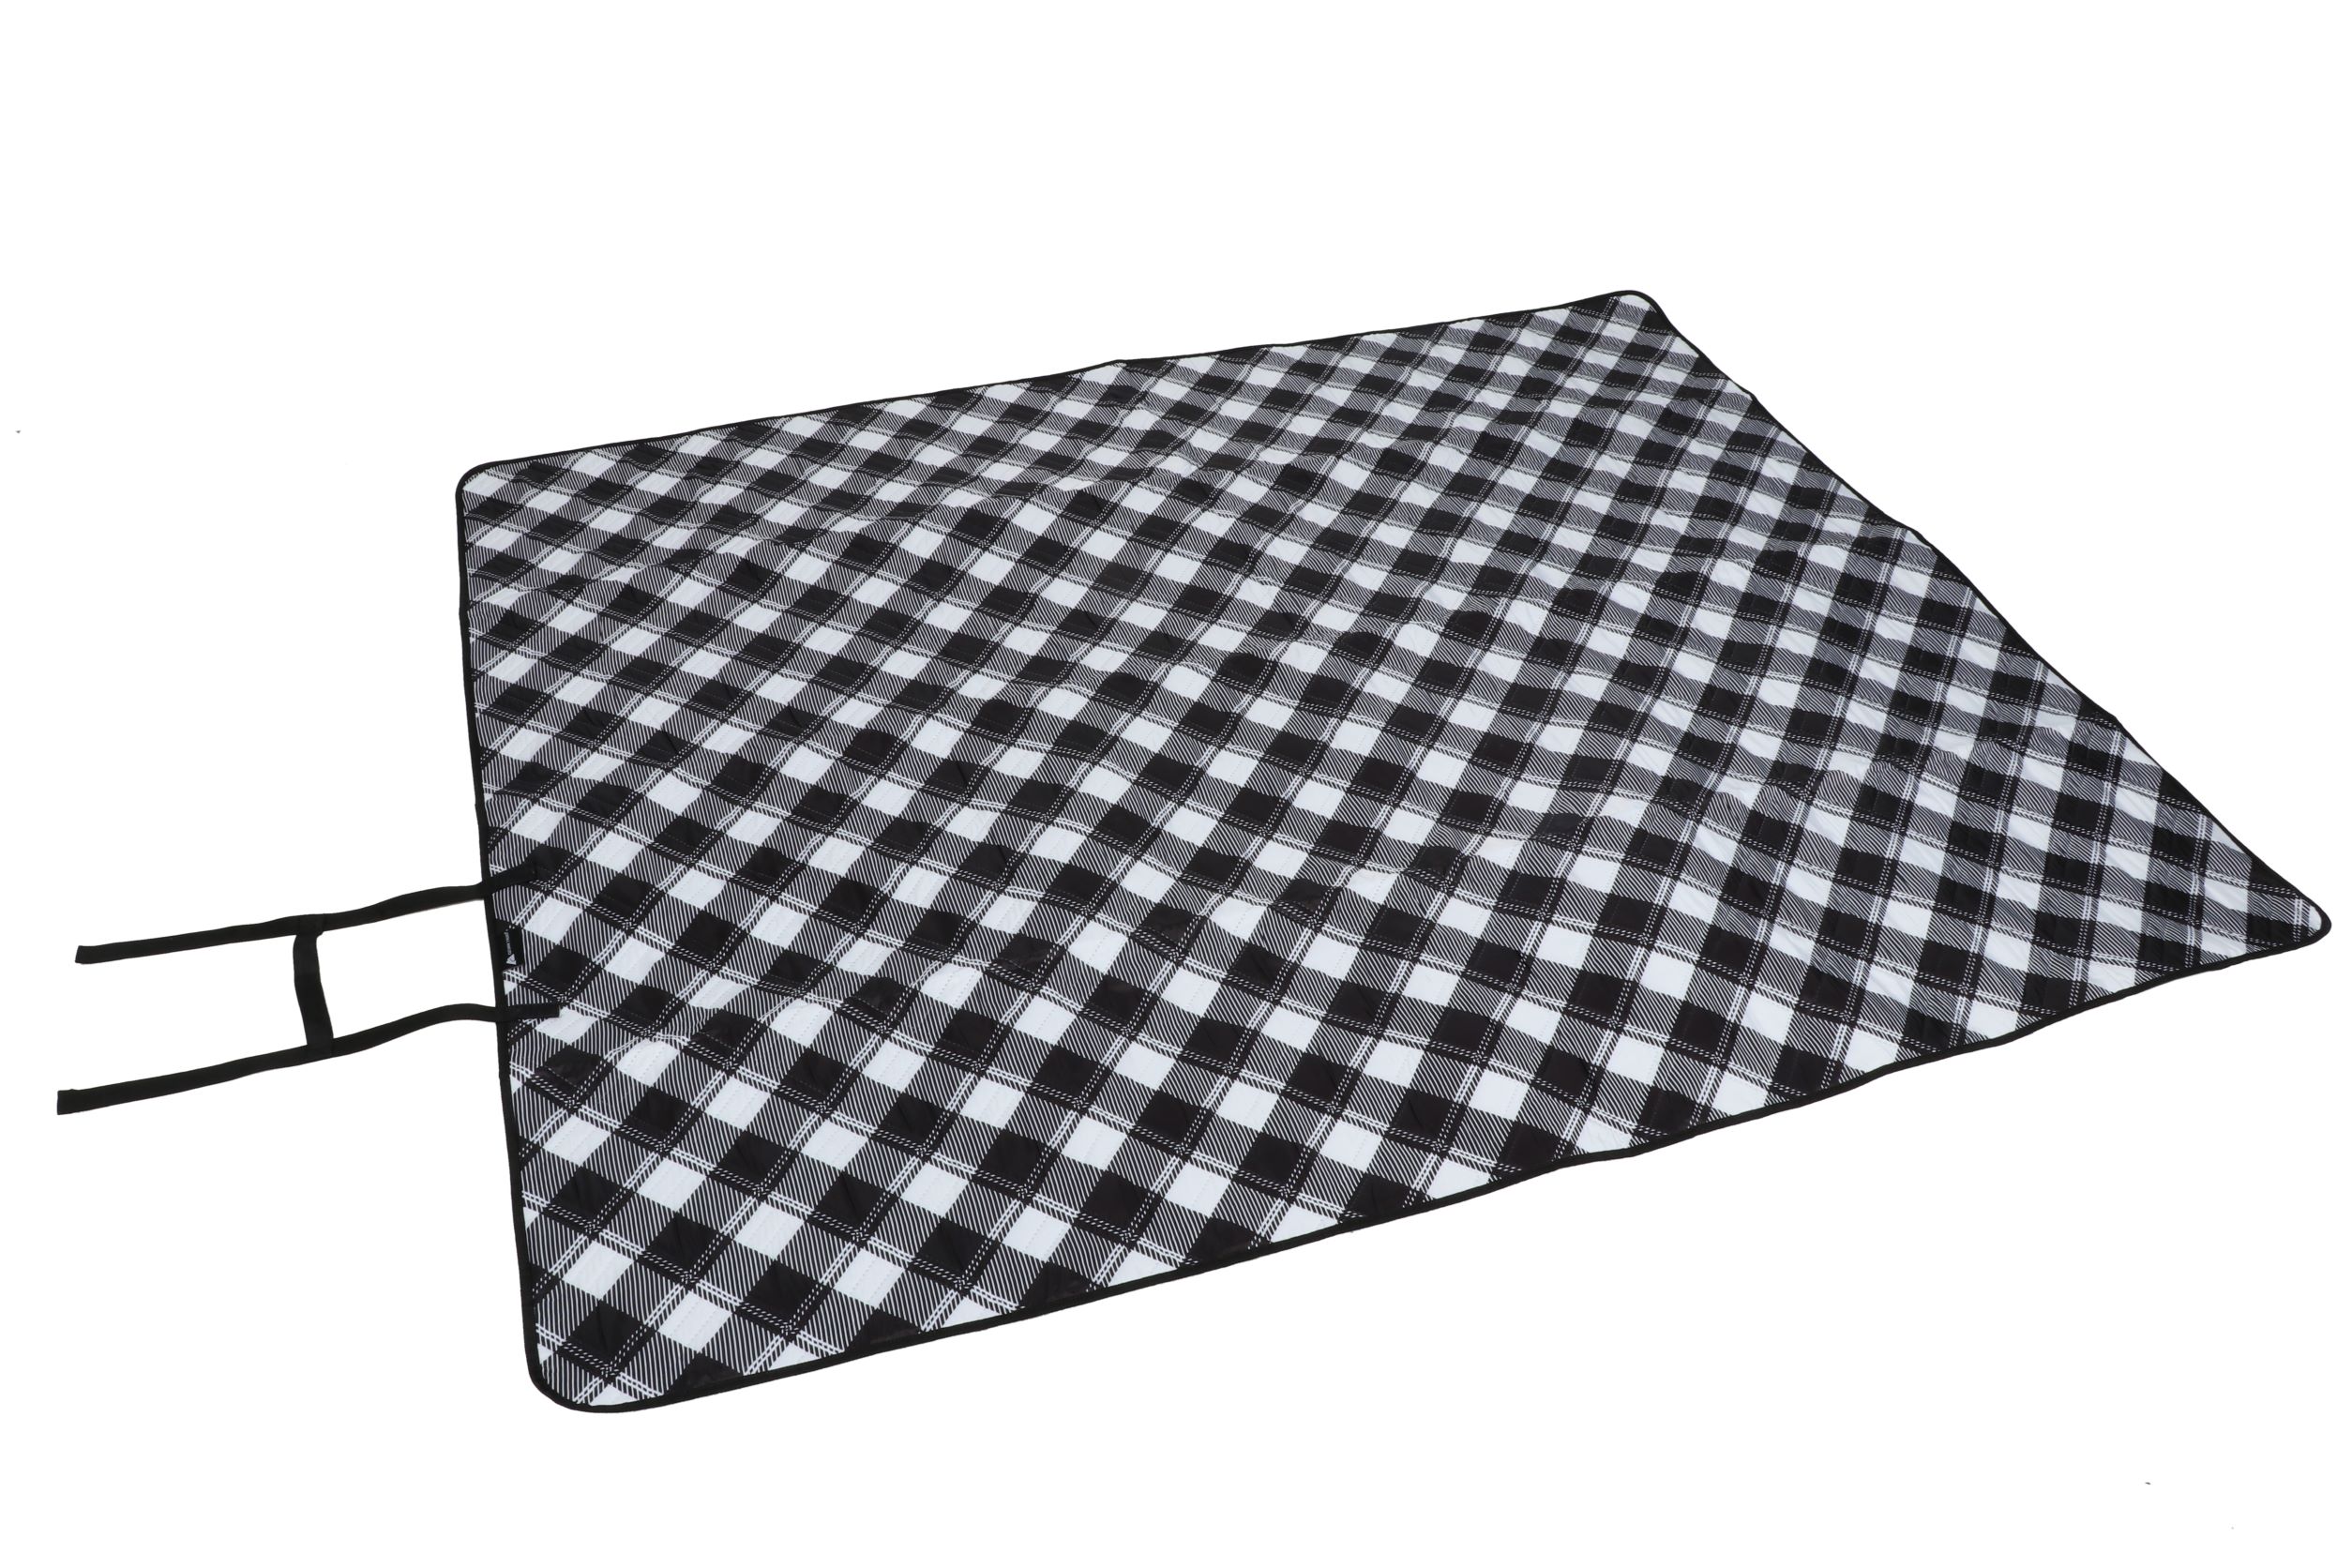 Ozark Trail Blanket and Two Chair Combo, Adult, Black White - image 5 of 14